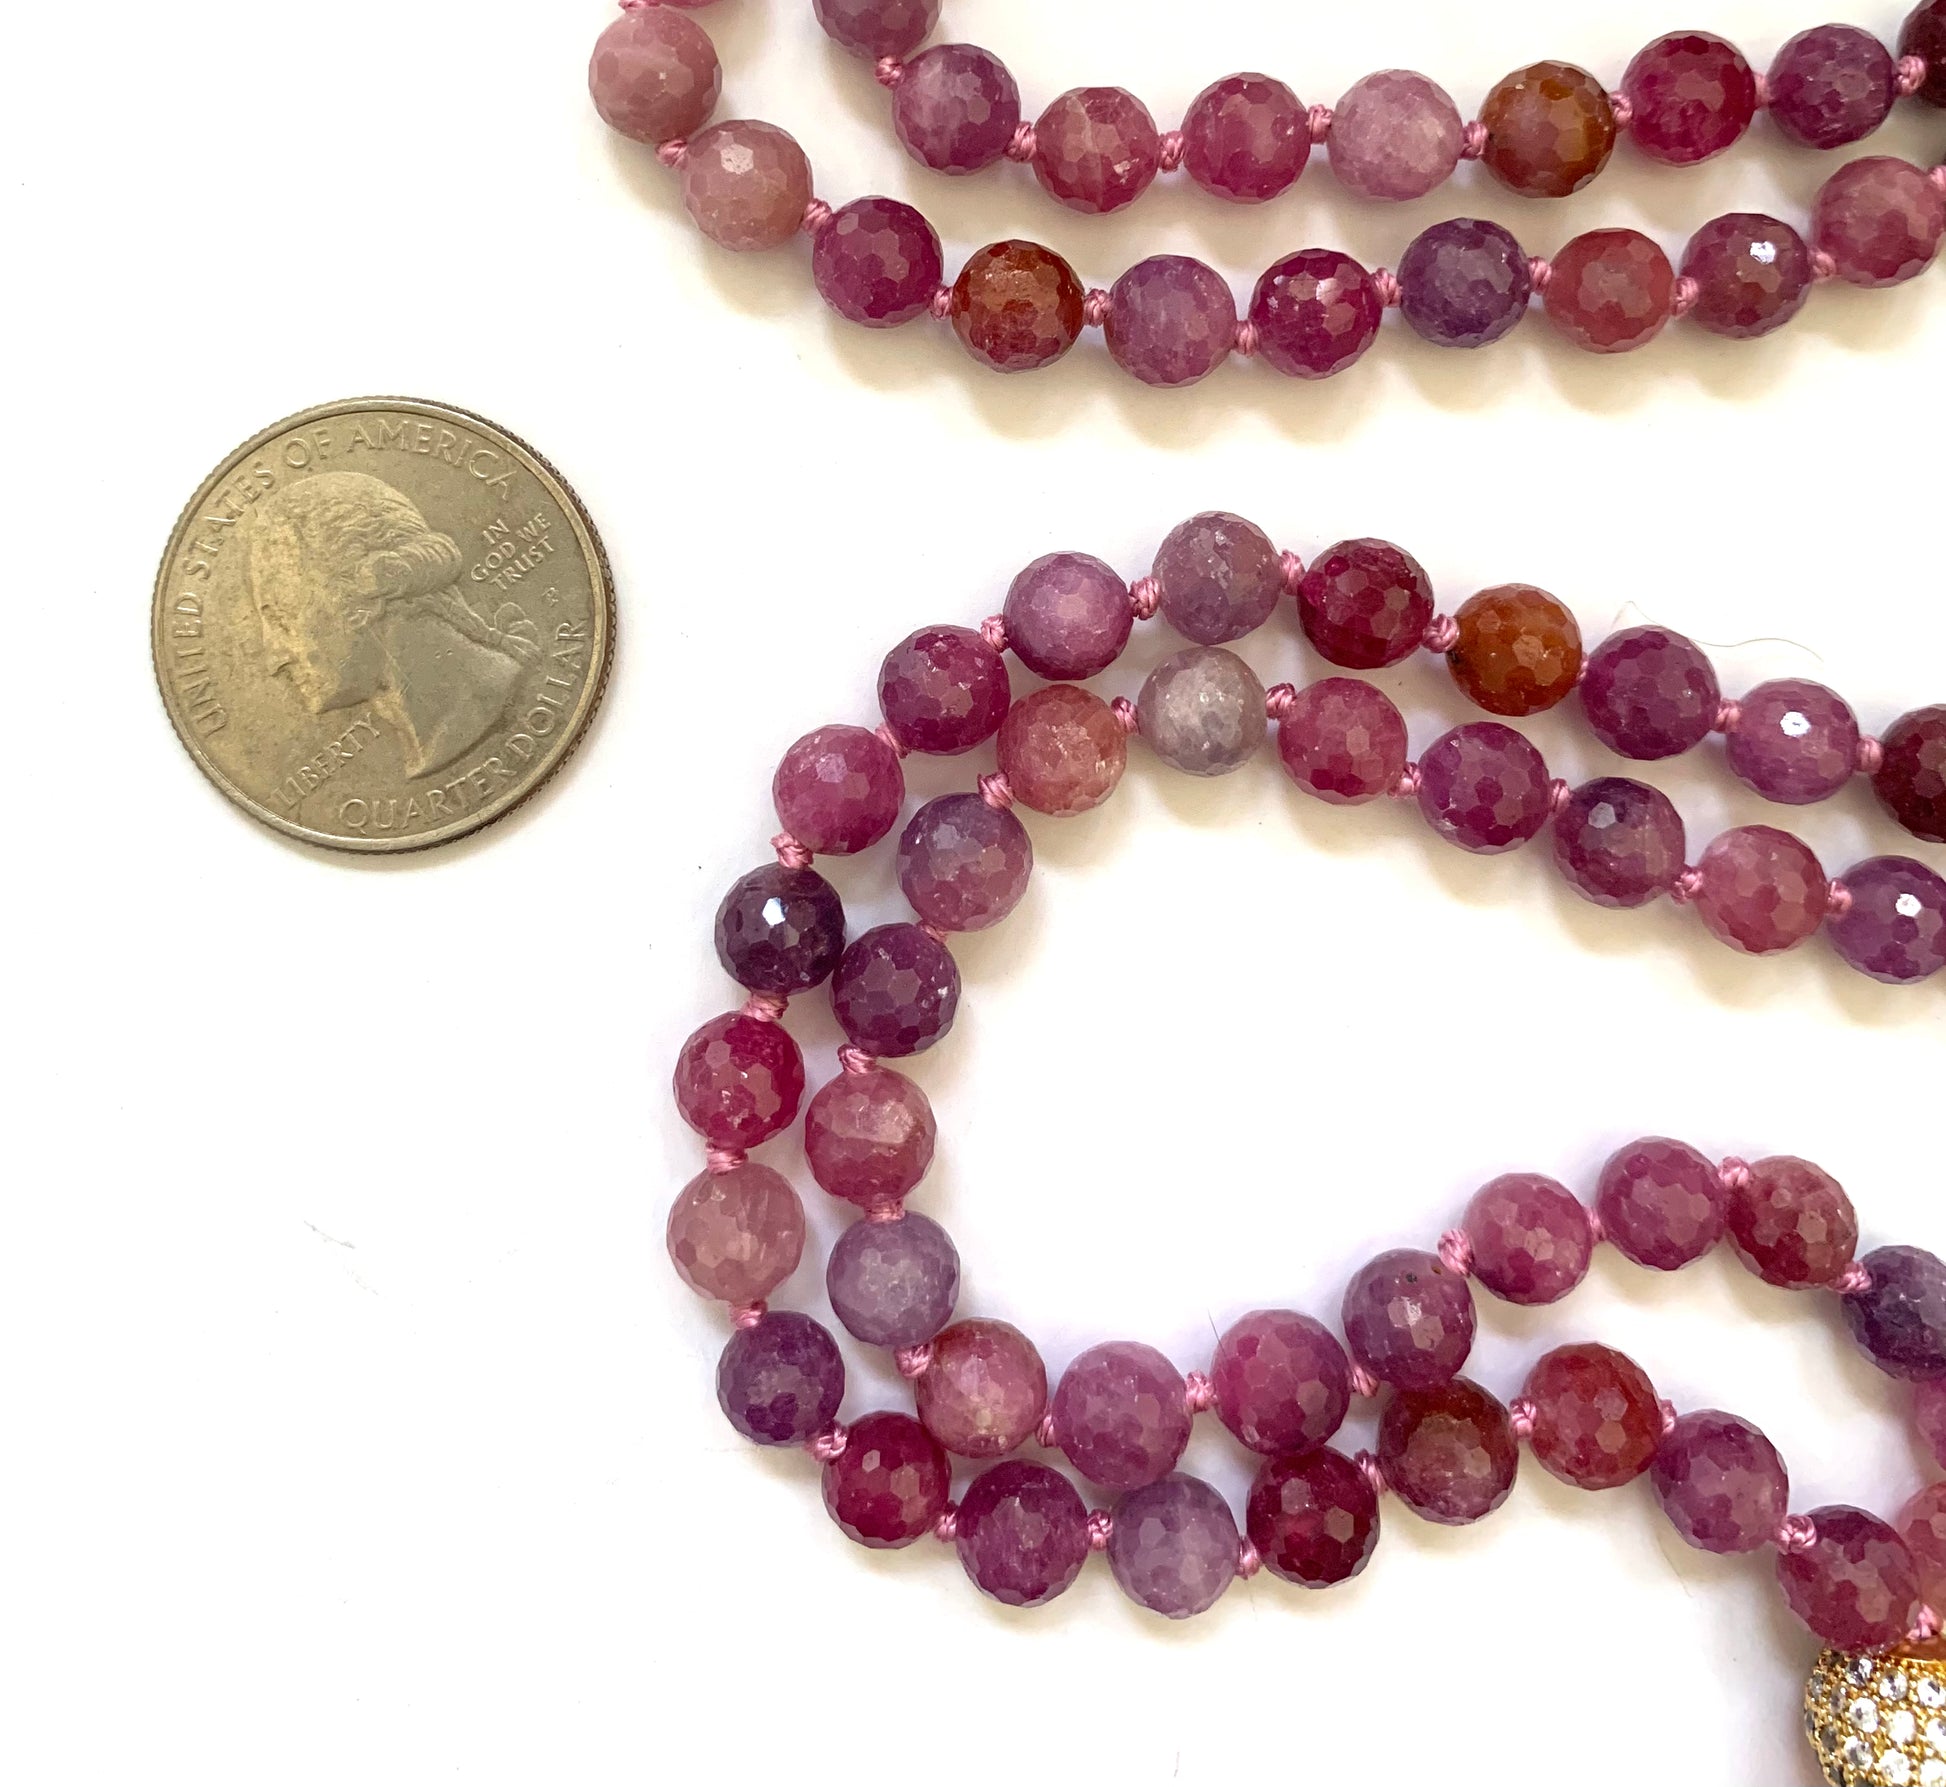 close up of ruby mala beads next to a quarter for size comparison